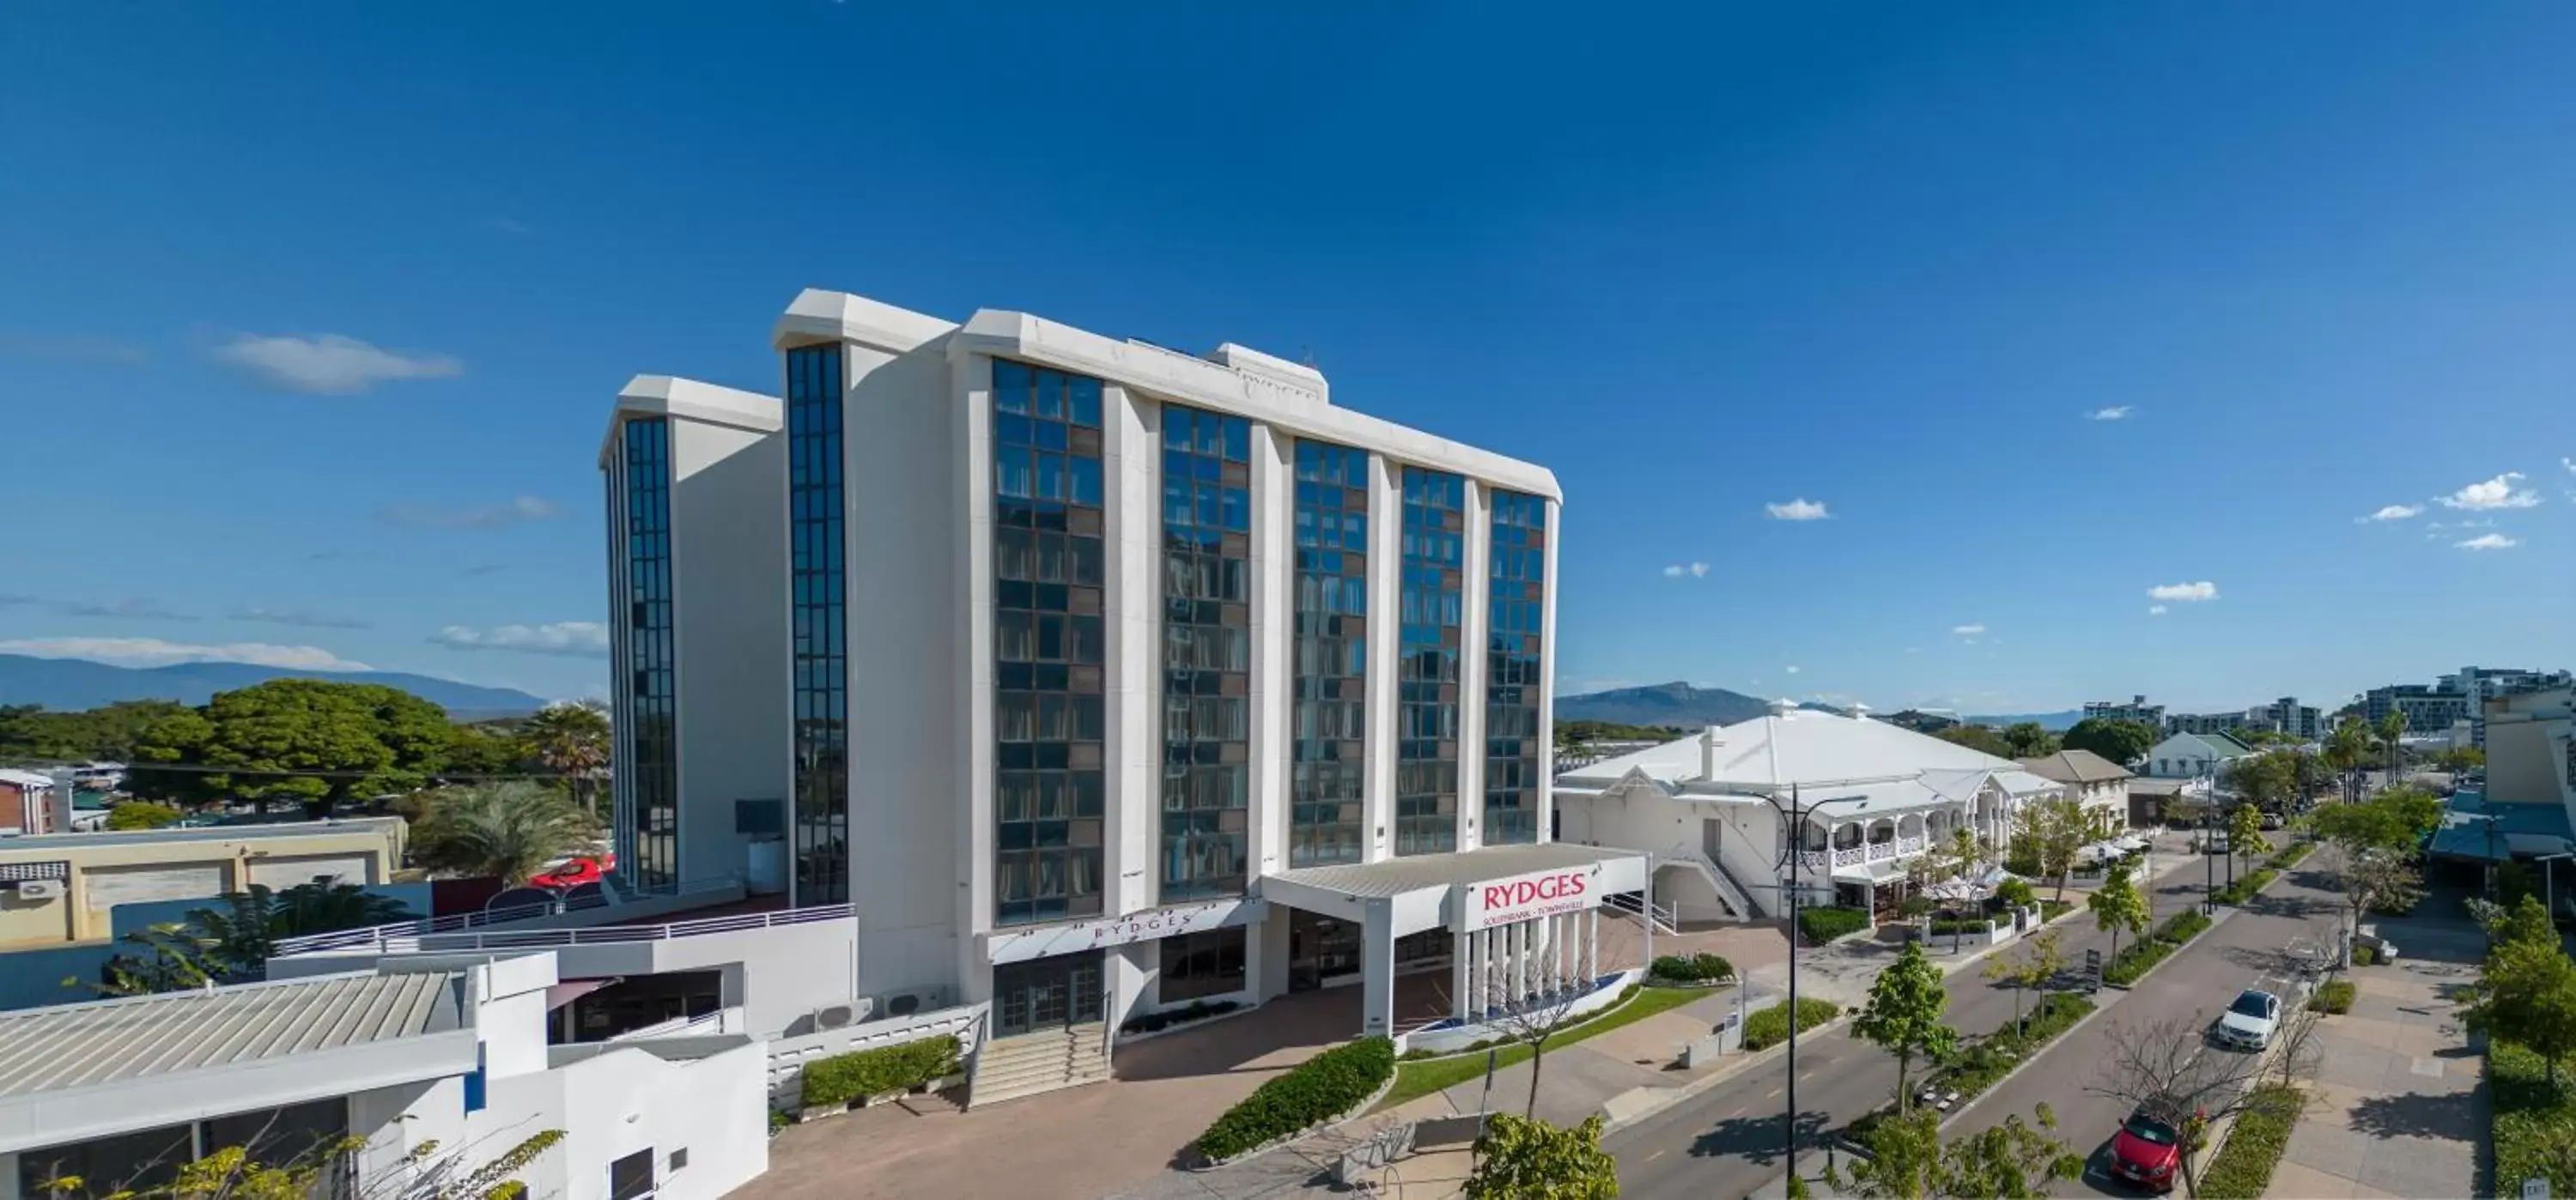 Property building in Rydges Southbank Townsville